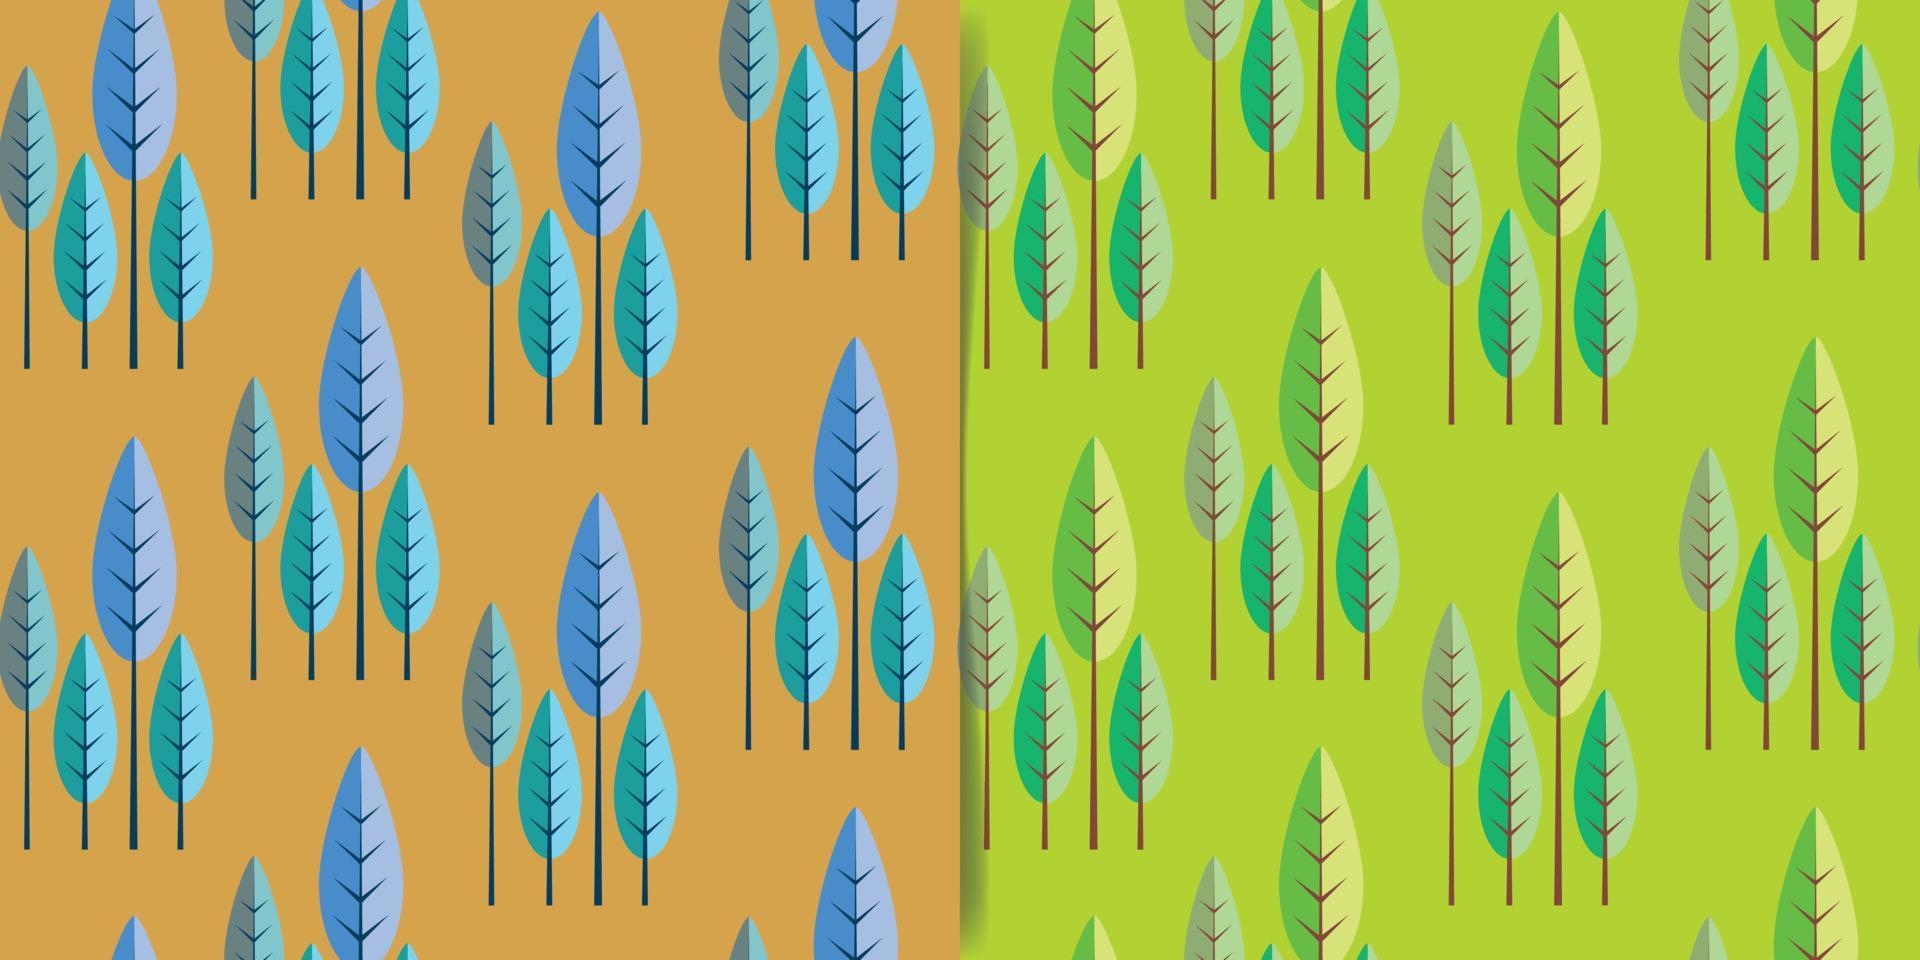 Set of patterns with trees. Vector background for various surfaces.